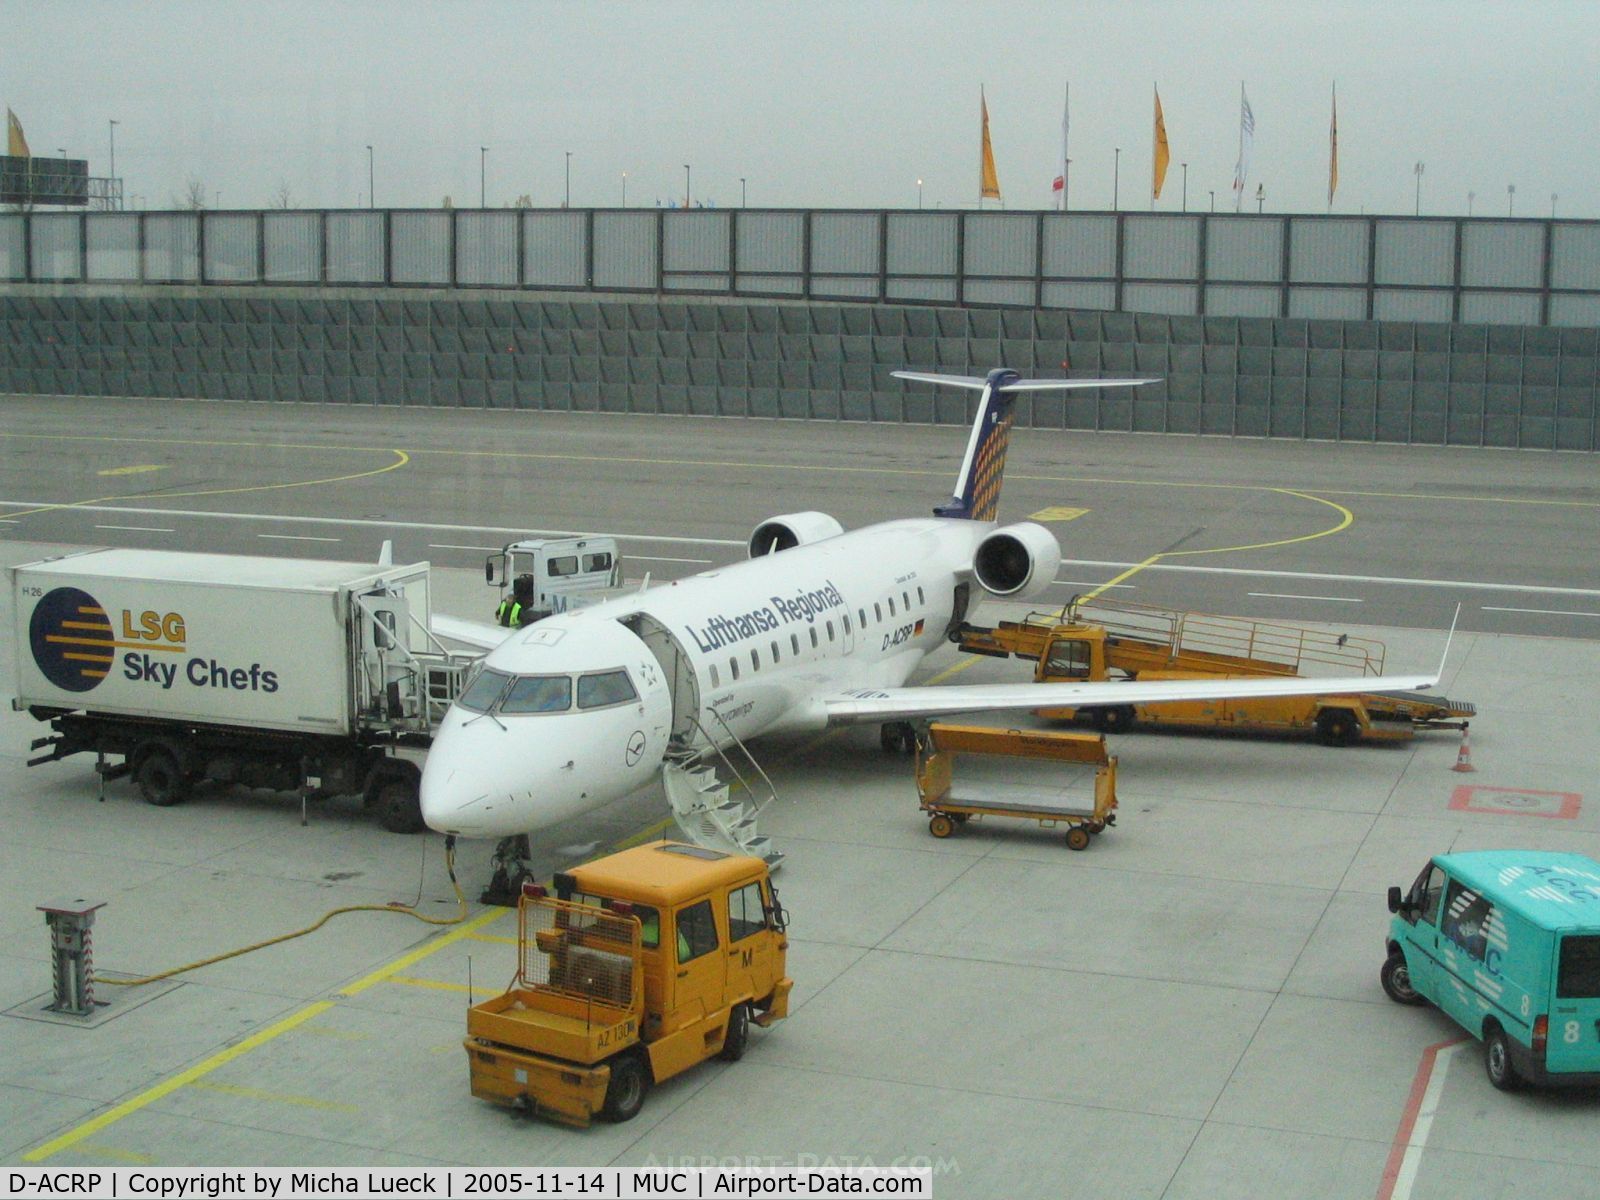 D-ACRP, 2002 Bombardier CRJ-200ER (CL-600-2B19) C/N 7625, Lufthansa Cityline and Team Lufthansa operate a large number of Canadair Regional Jets